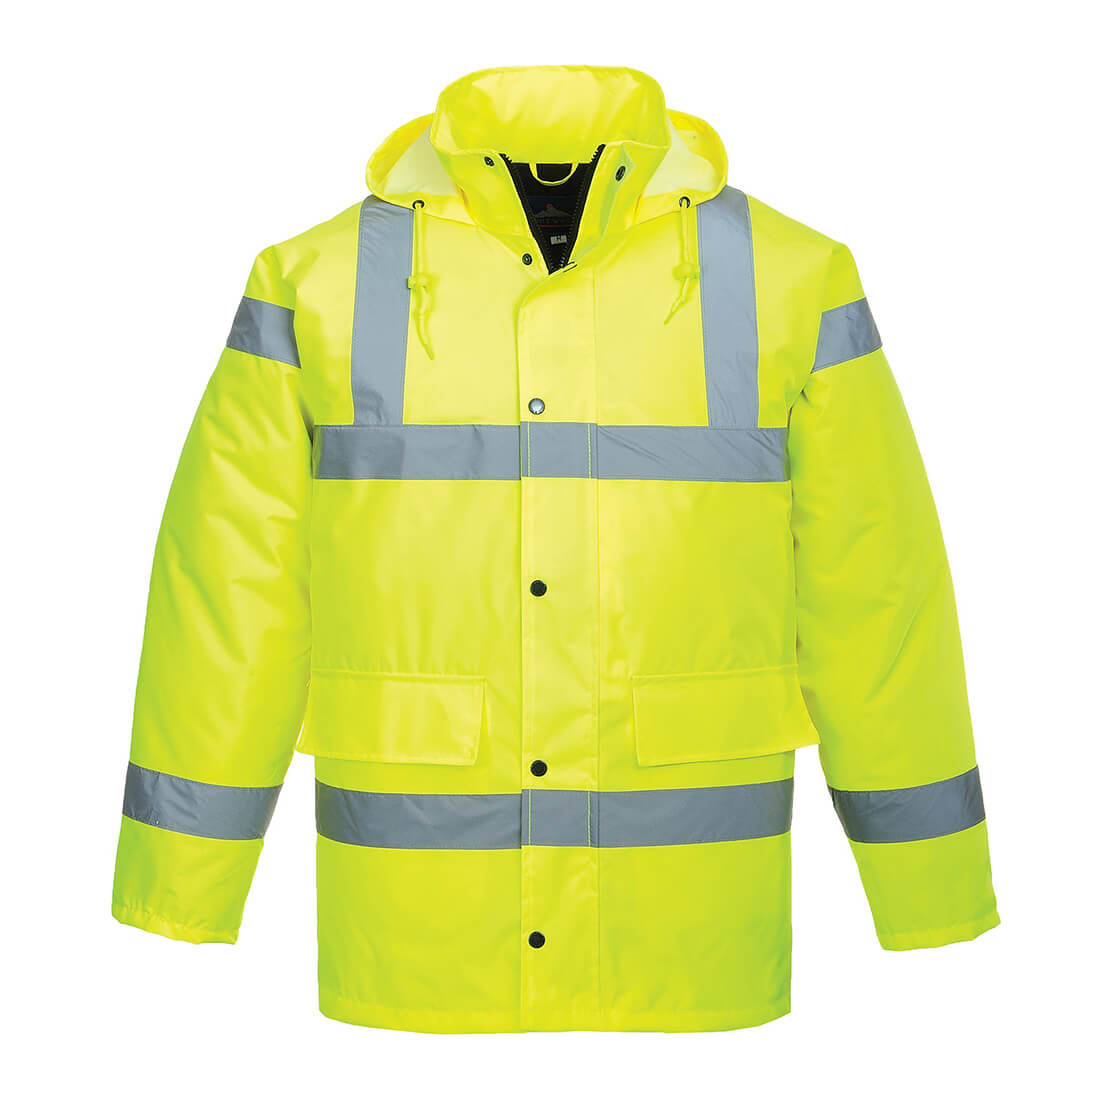 Image of Oxford Weave 300D Class 3 Hi Vis Traffic Jacket Yellow 3XL